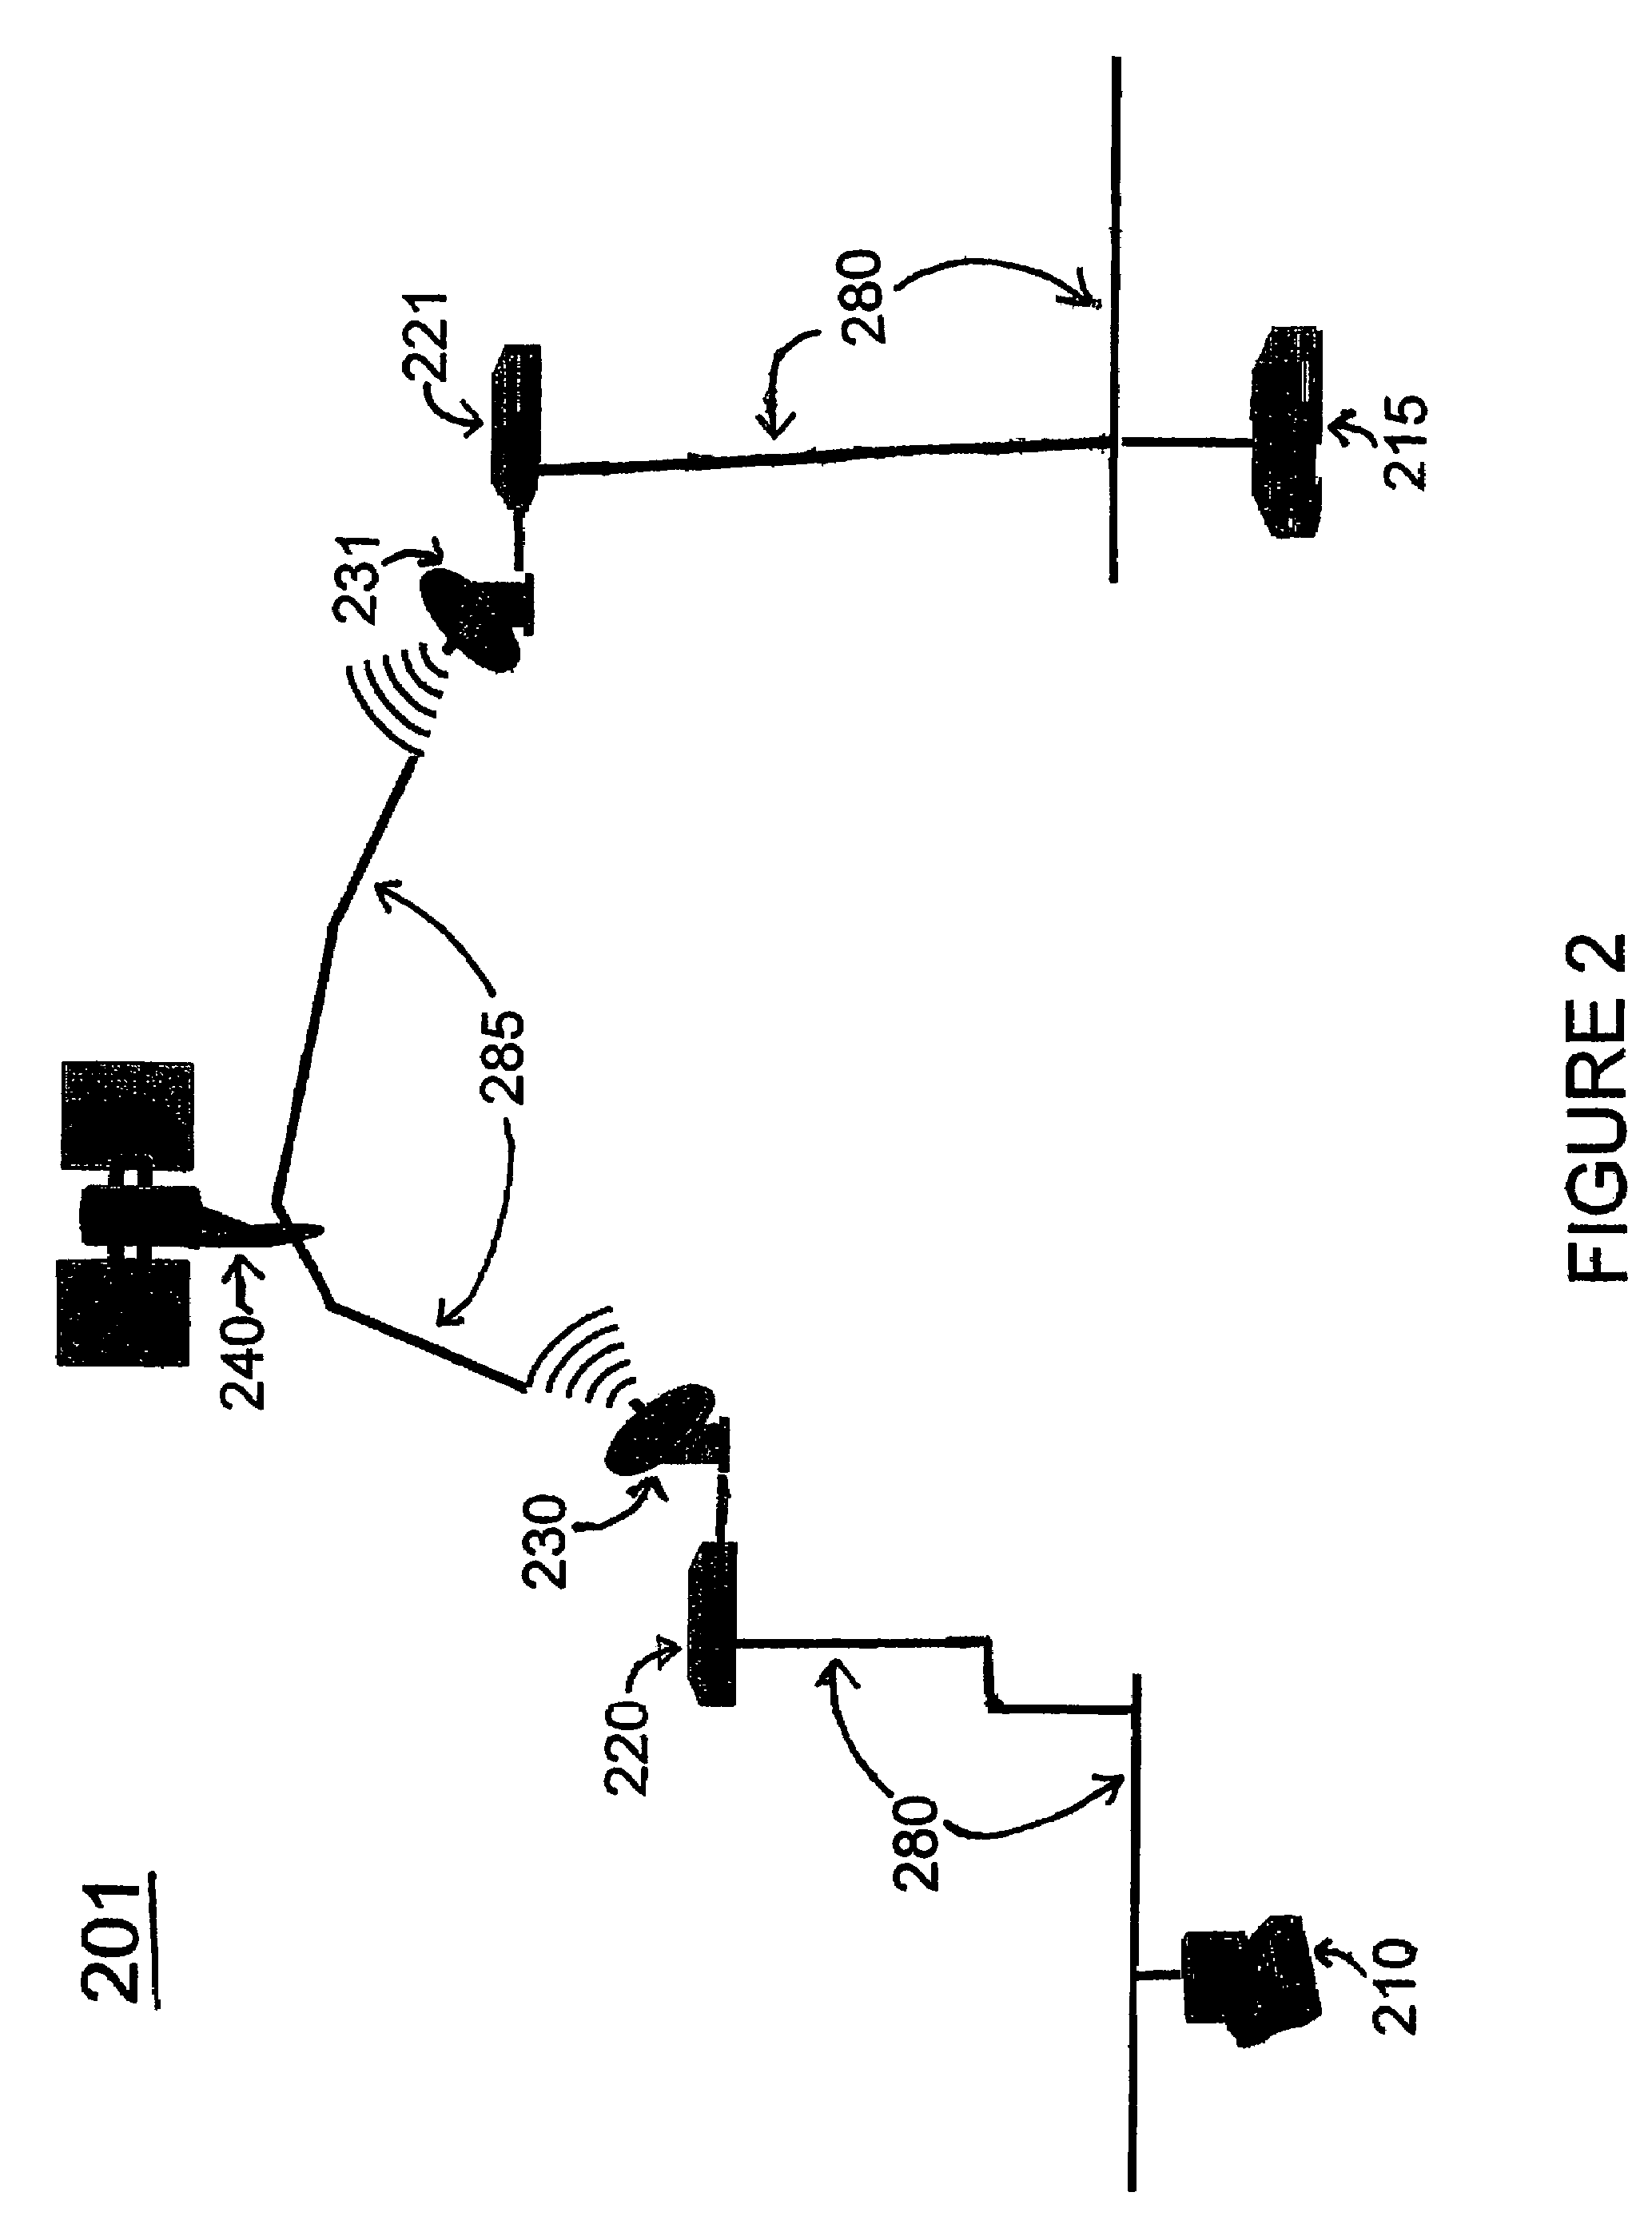 Method and system for providing end-to-end security solutions to aid protocol acceleration over networks using selective layer encryption